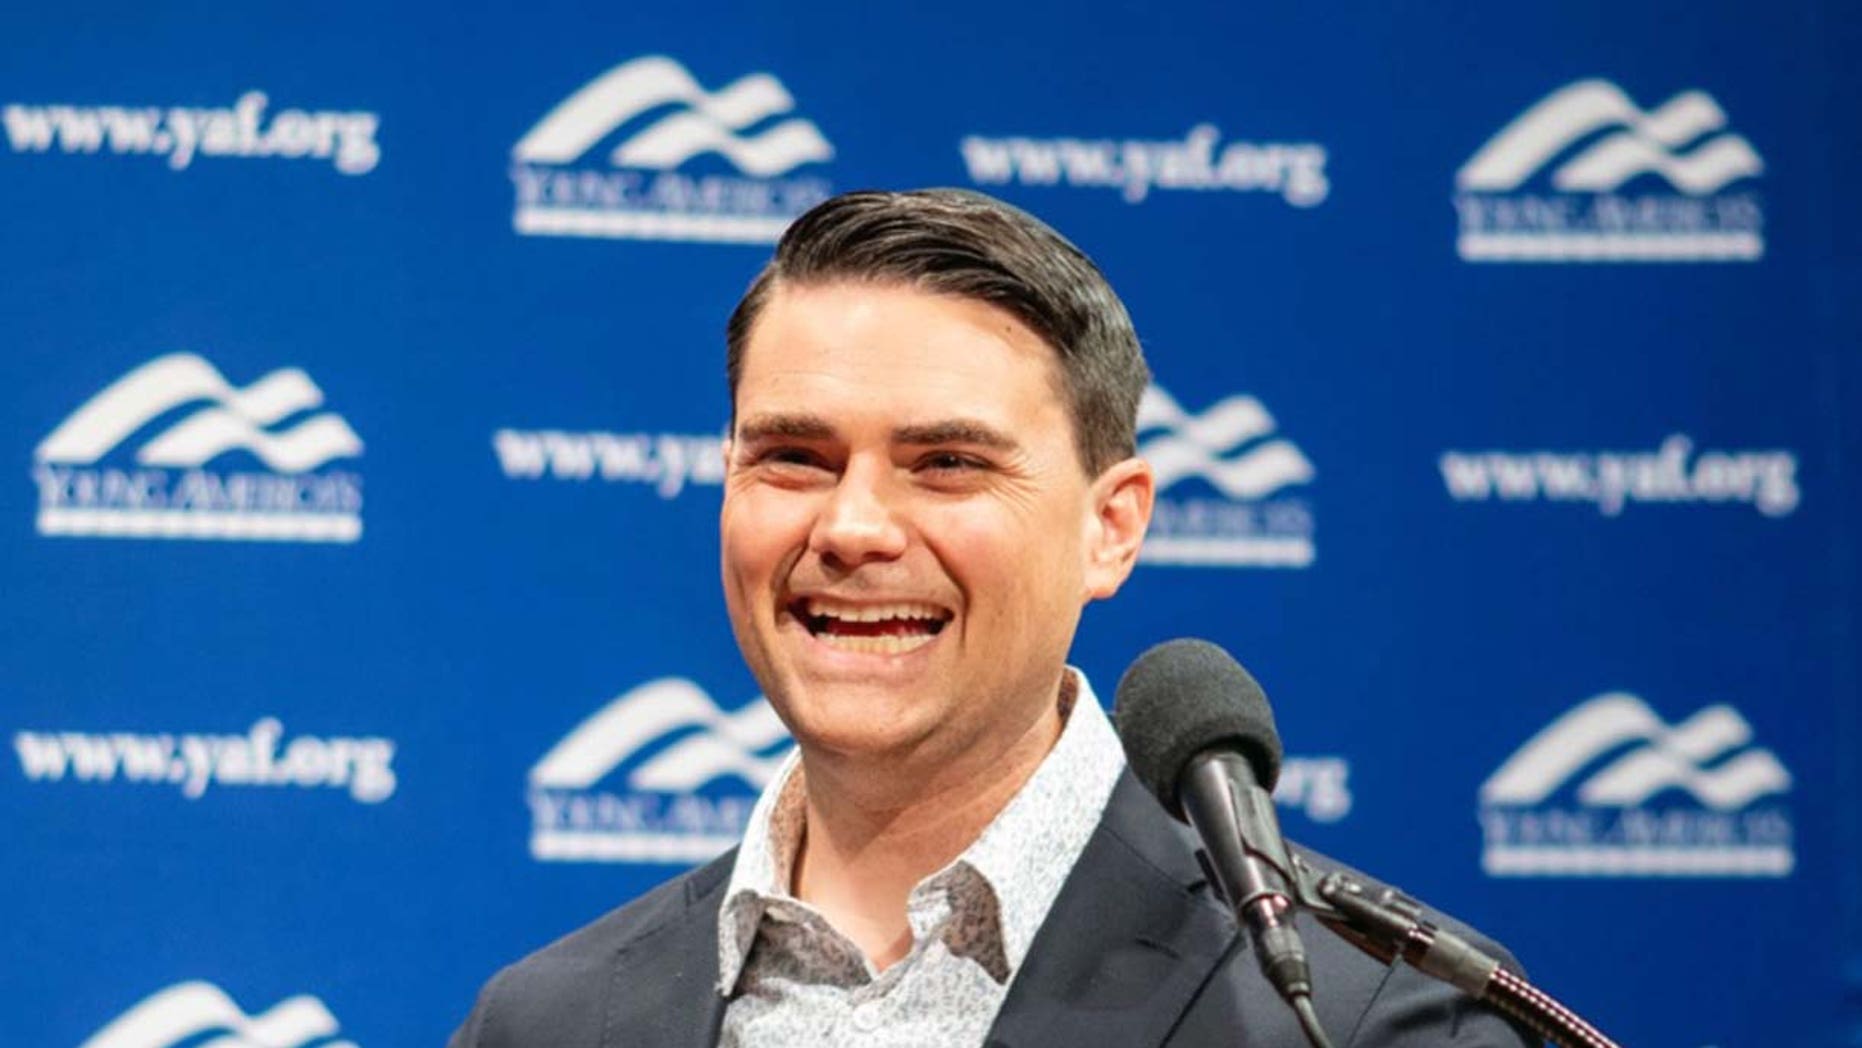 Ben Shapiro to speak at Christian college after it initially spurned him, Young America's